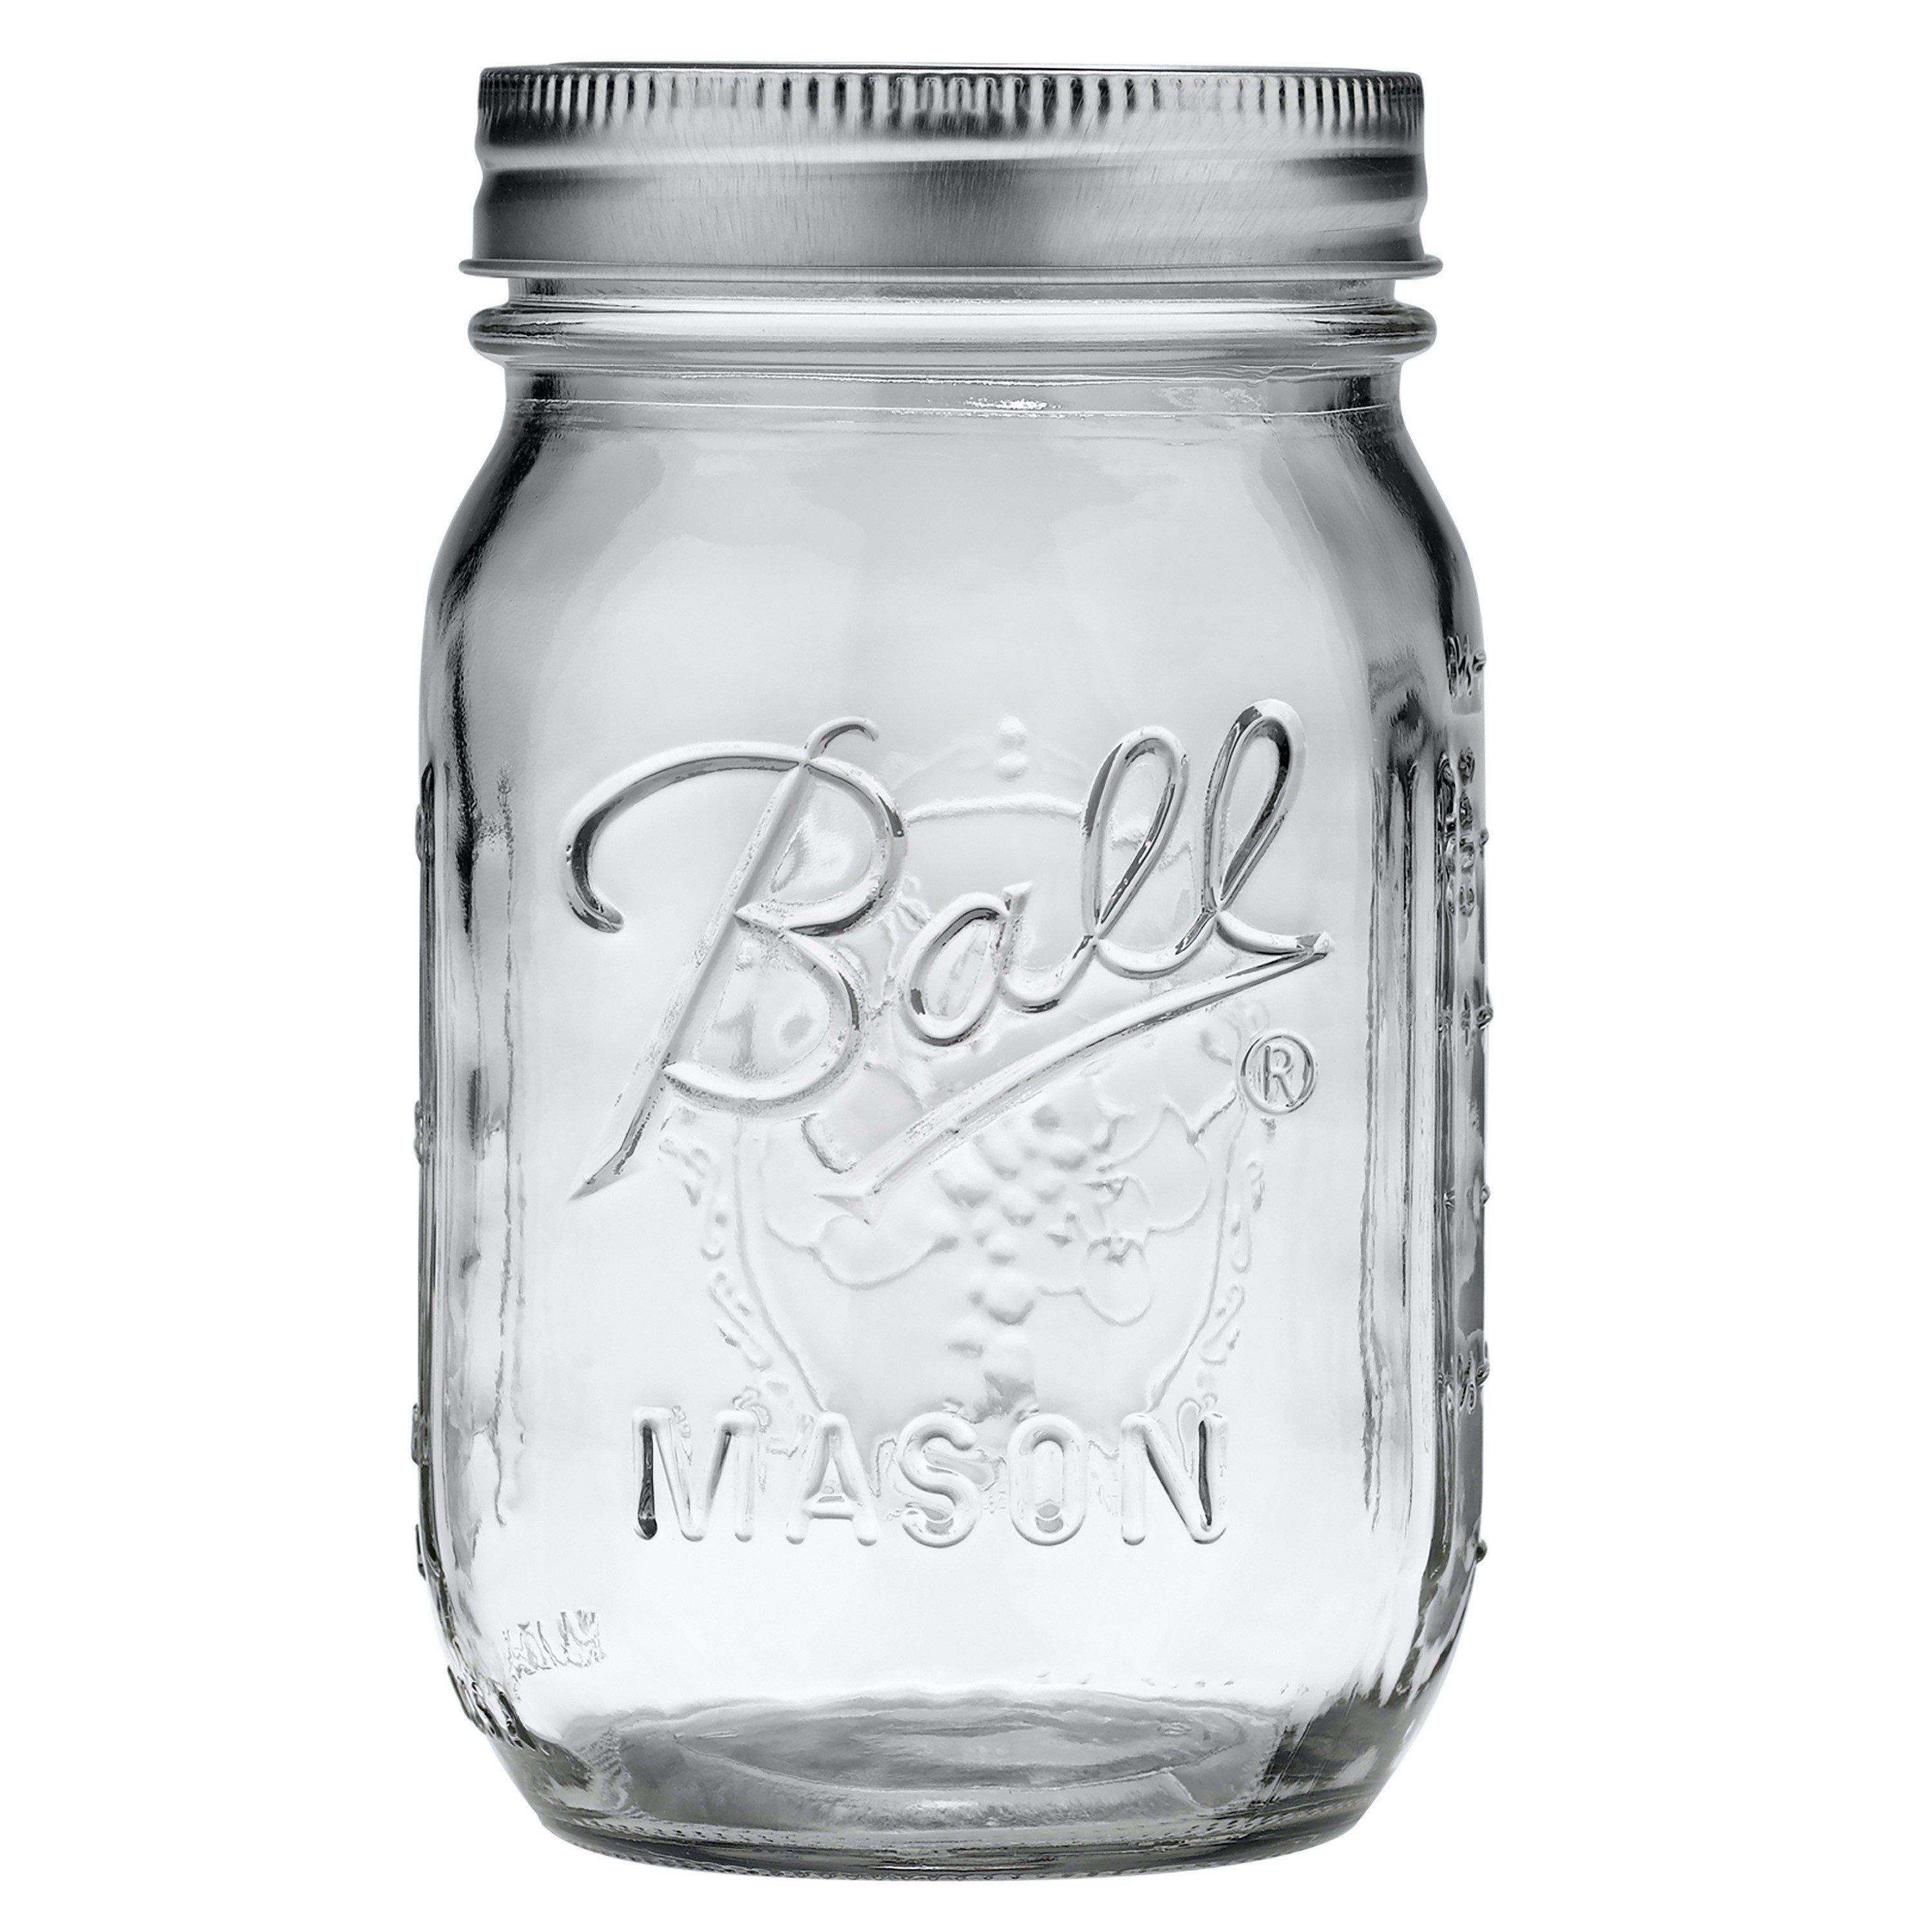 Ball Regular Mouth 16oz Pint Mason Jars with Lids & Bands, 12 Count - image 1 of 8